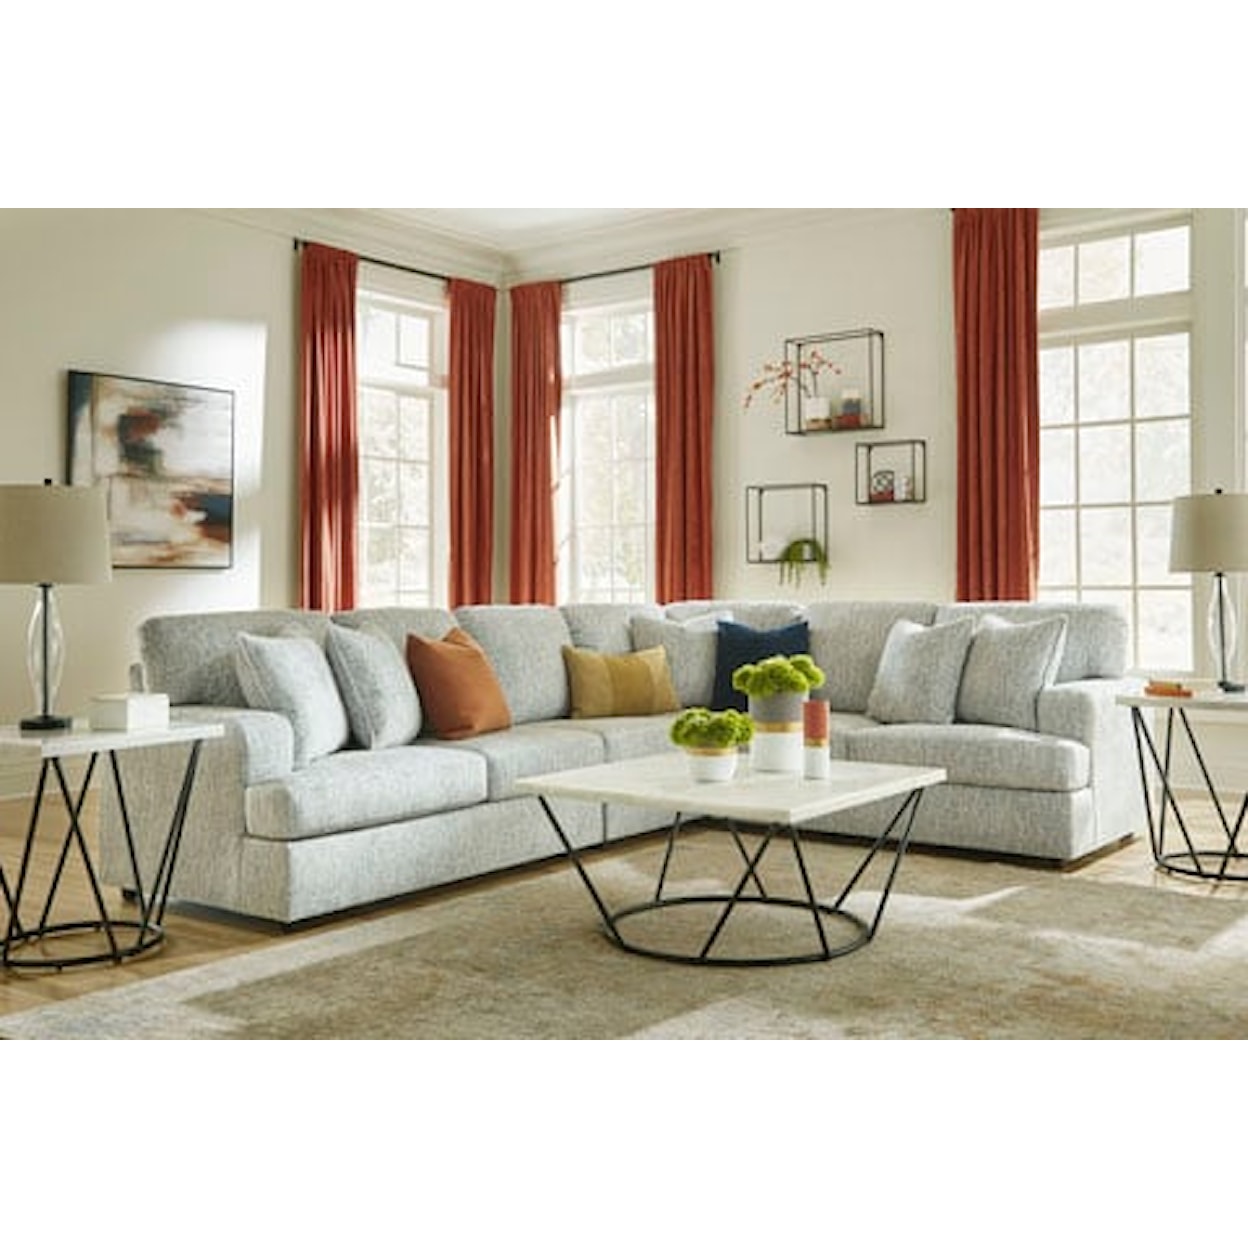 Signature Design by Ashley Playwrite Sectional Sofa